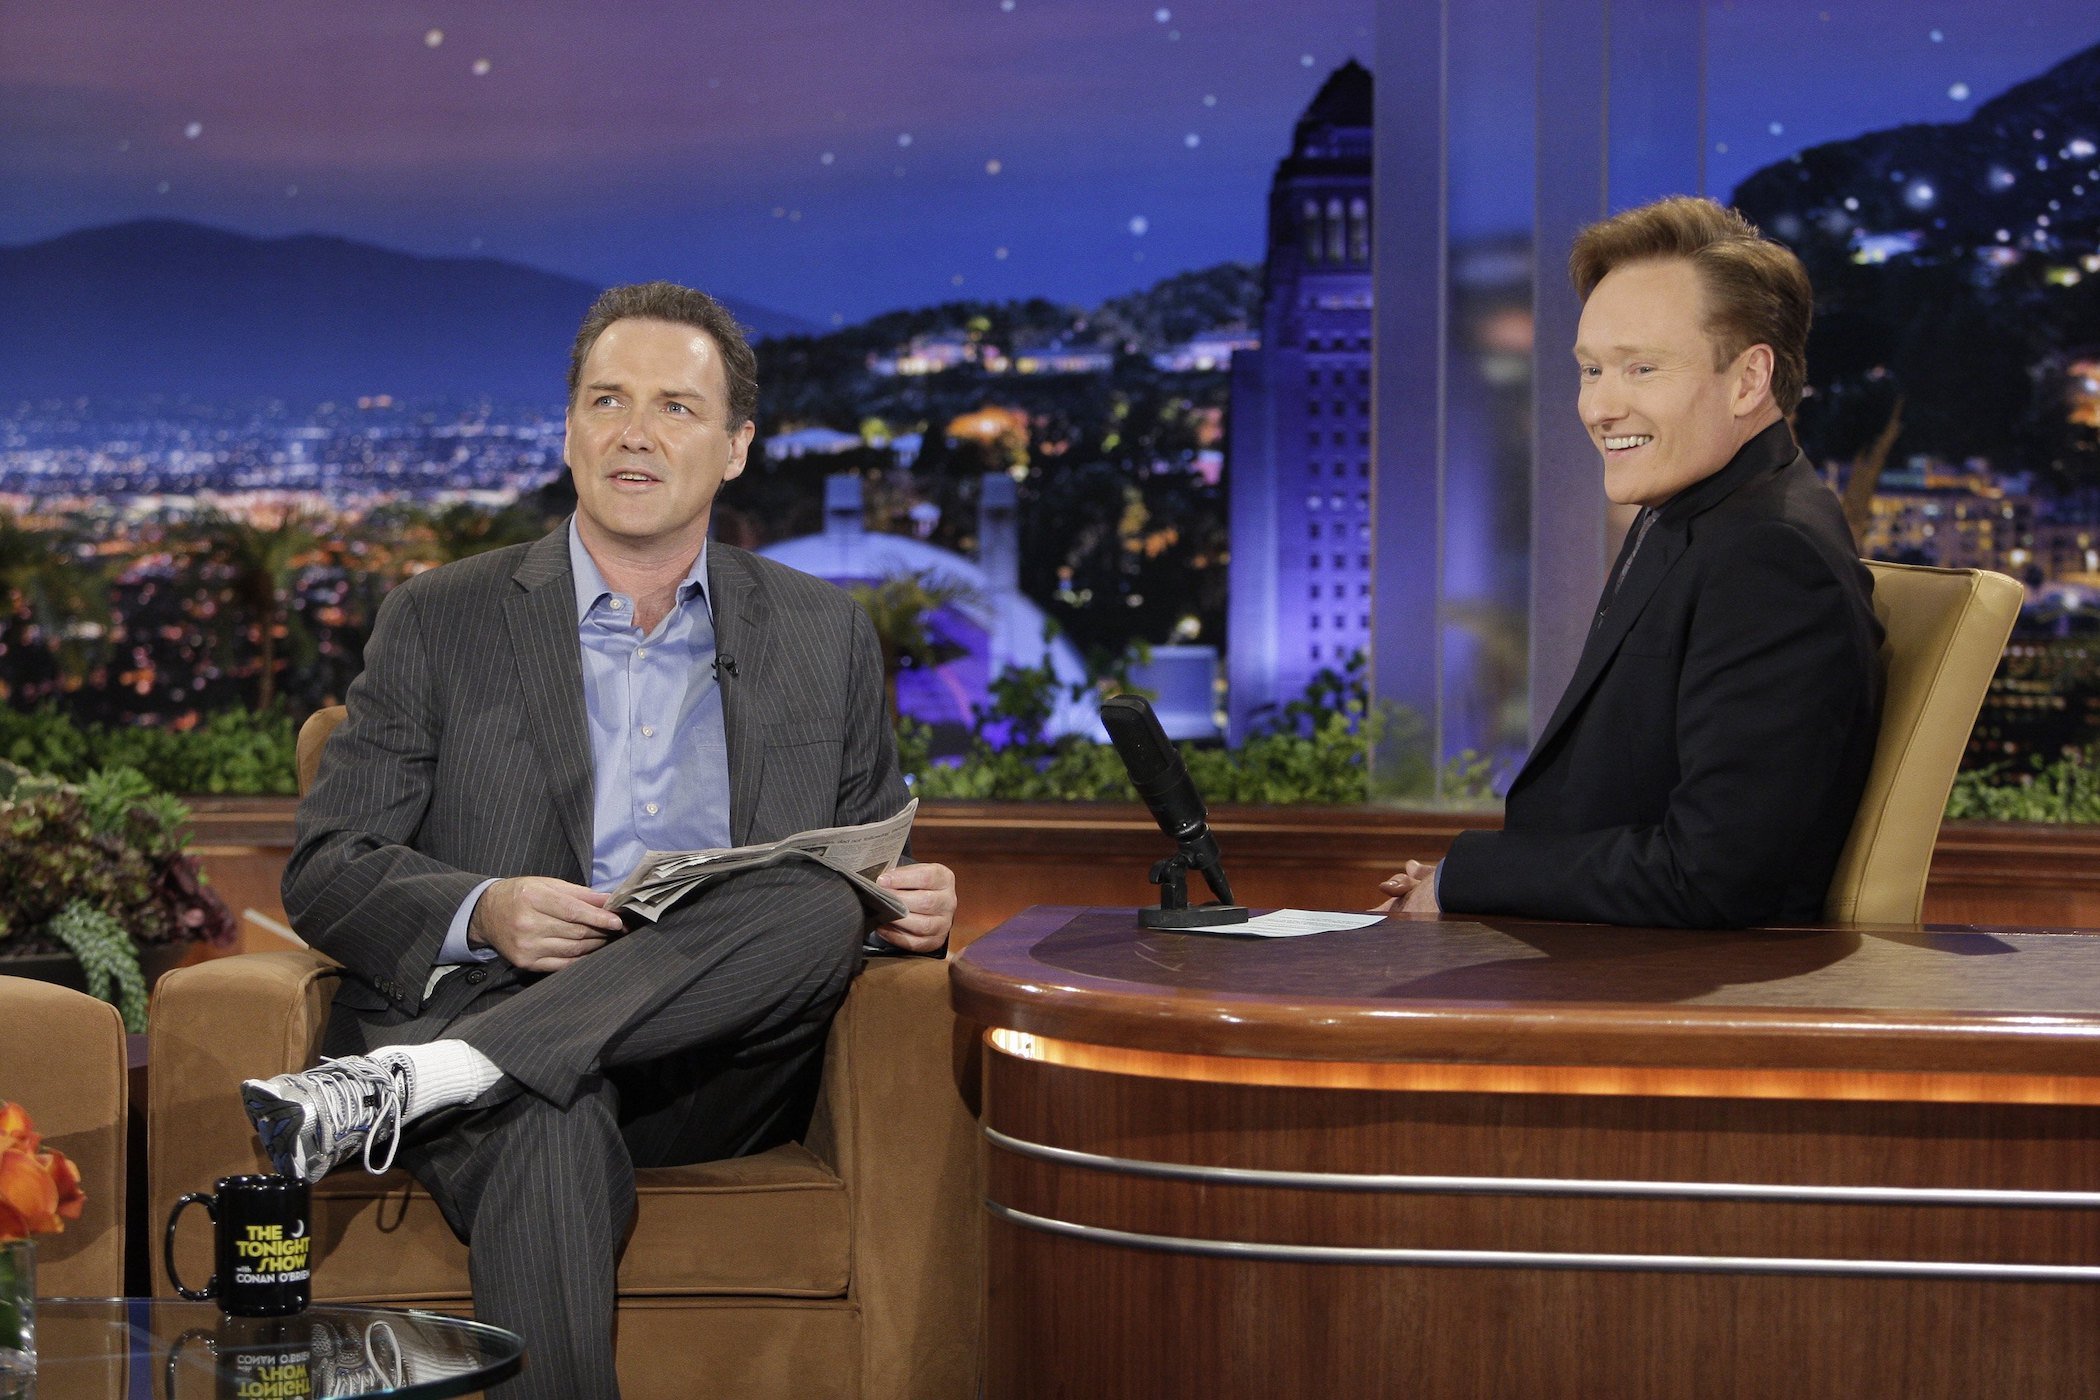 Norm Macdonald talking to Conan O'Brien. Norm Macdonald's wife and son come up in conversation during late-night shows. 